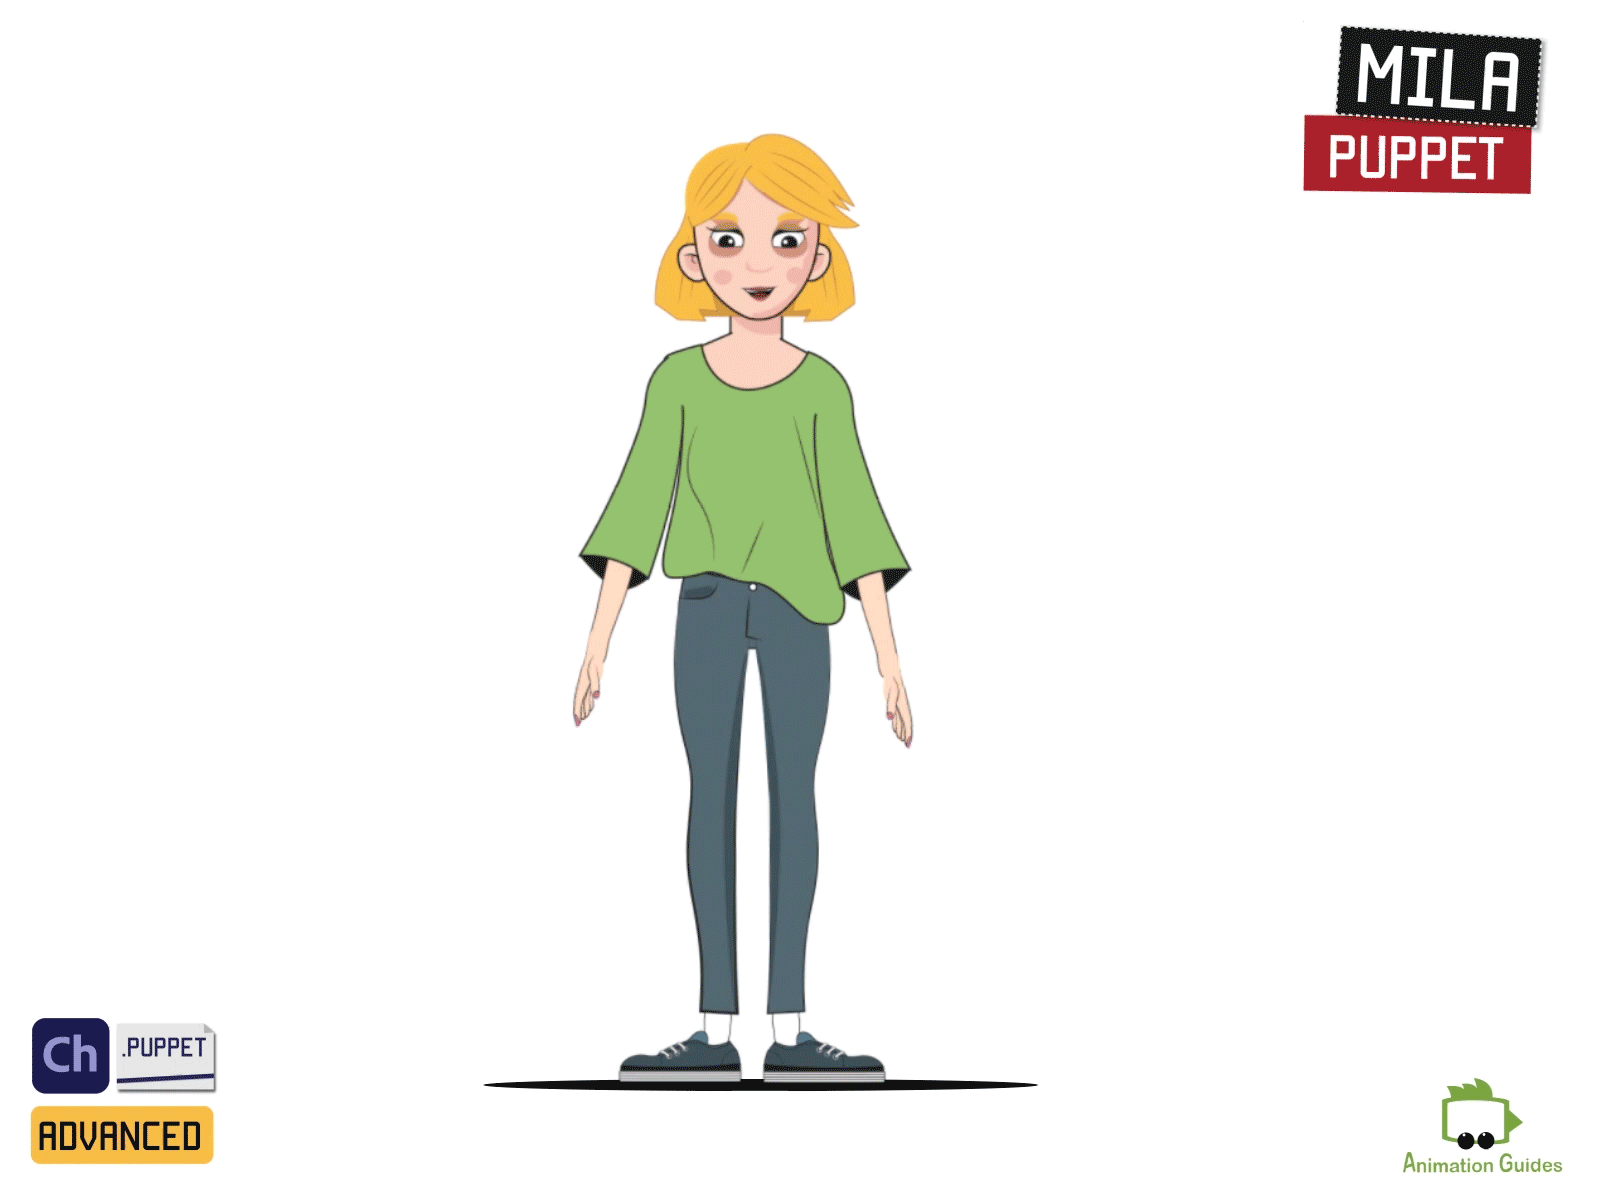 1..2..3... animated animation blonde character character animator character design counting download female girl puppet vector woman